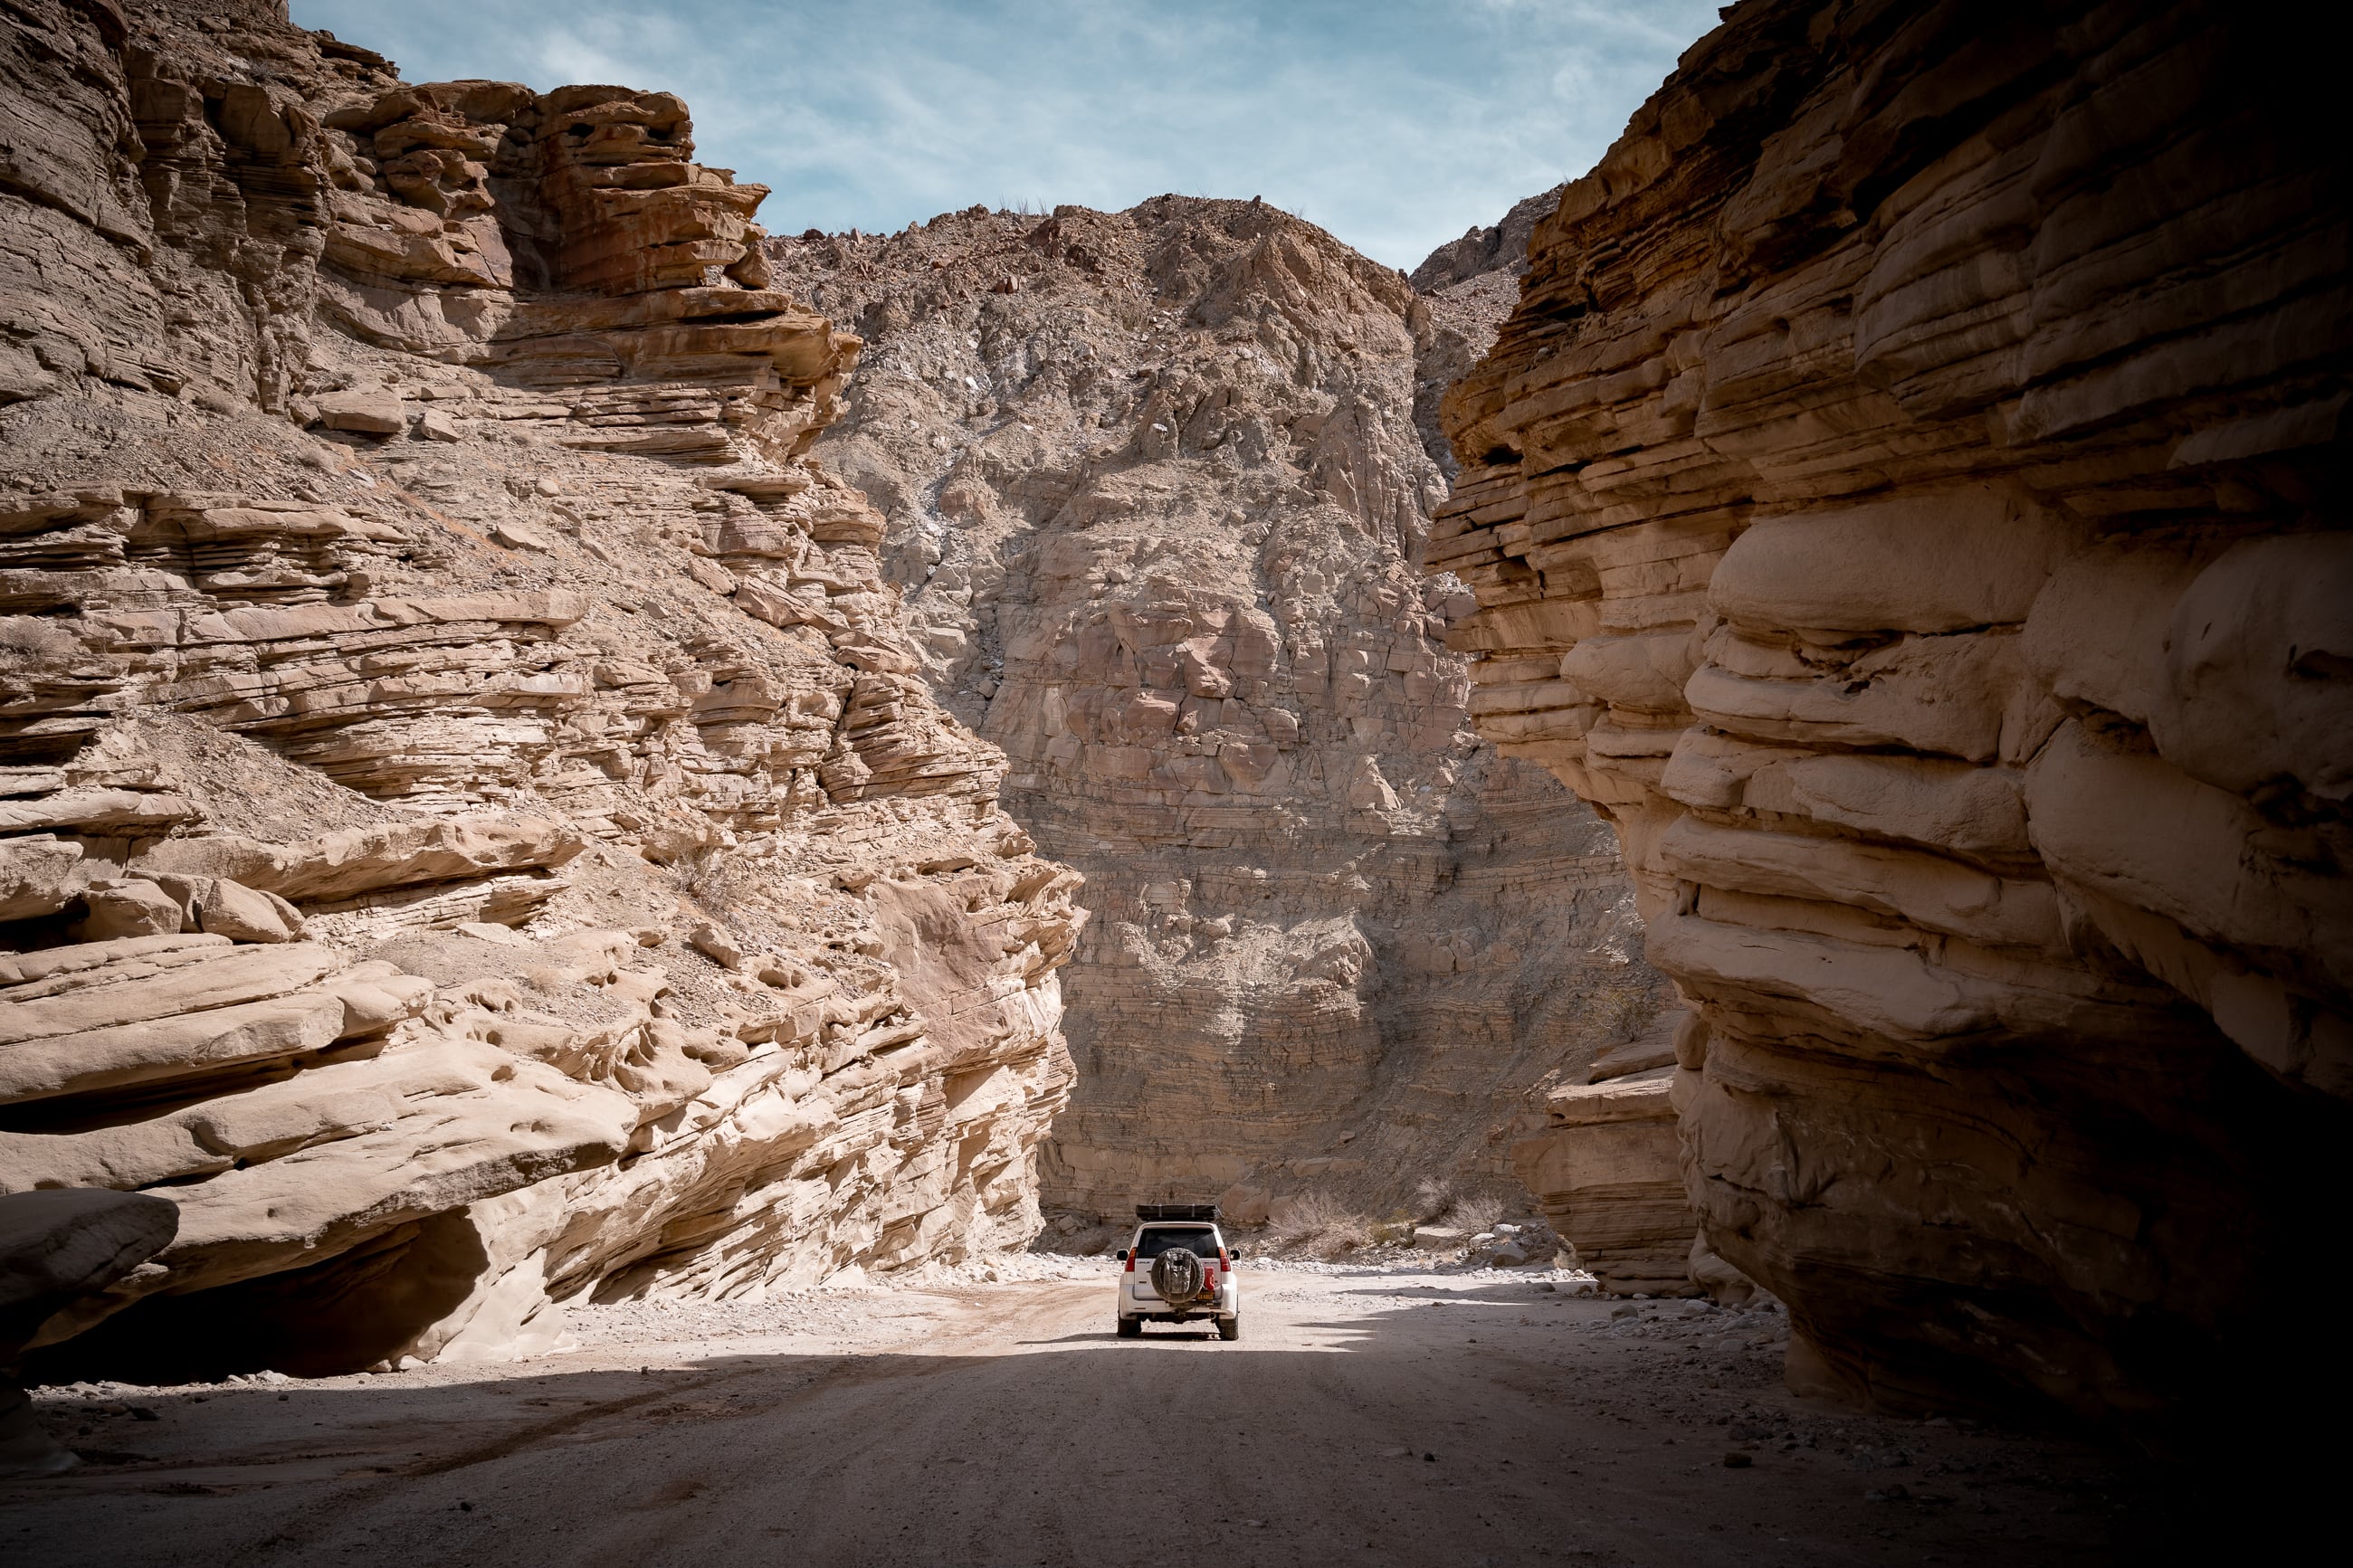 A single SUV, a LexusGX470 sits in the middle of a canyon, dwarfed by sandy brown craggy layers of rock walls.